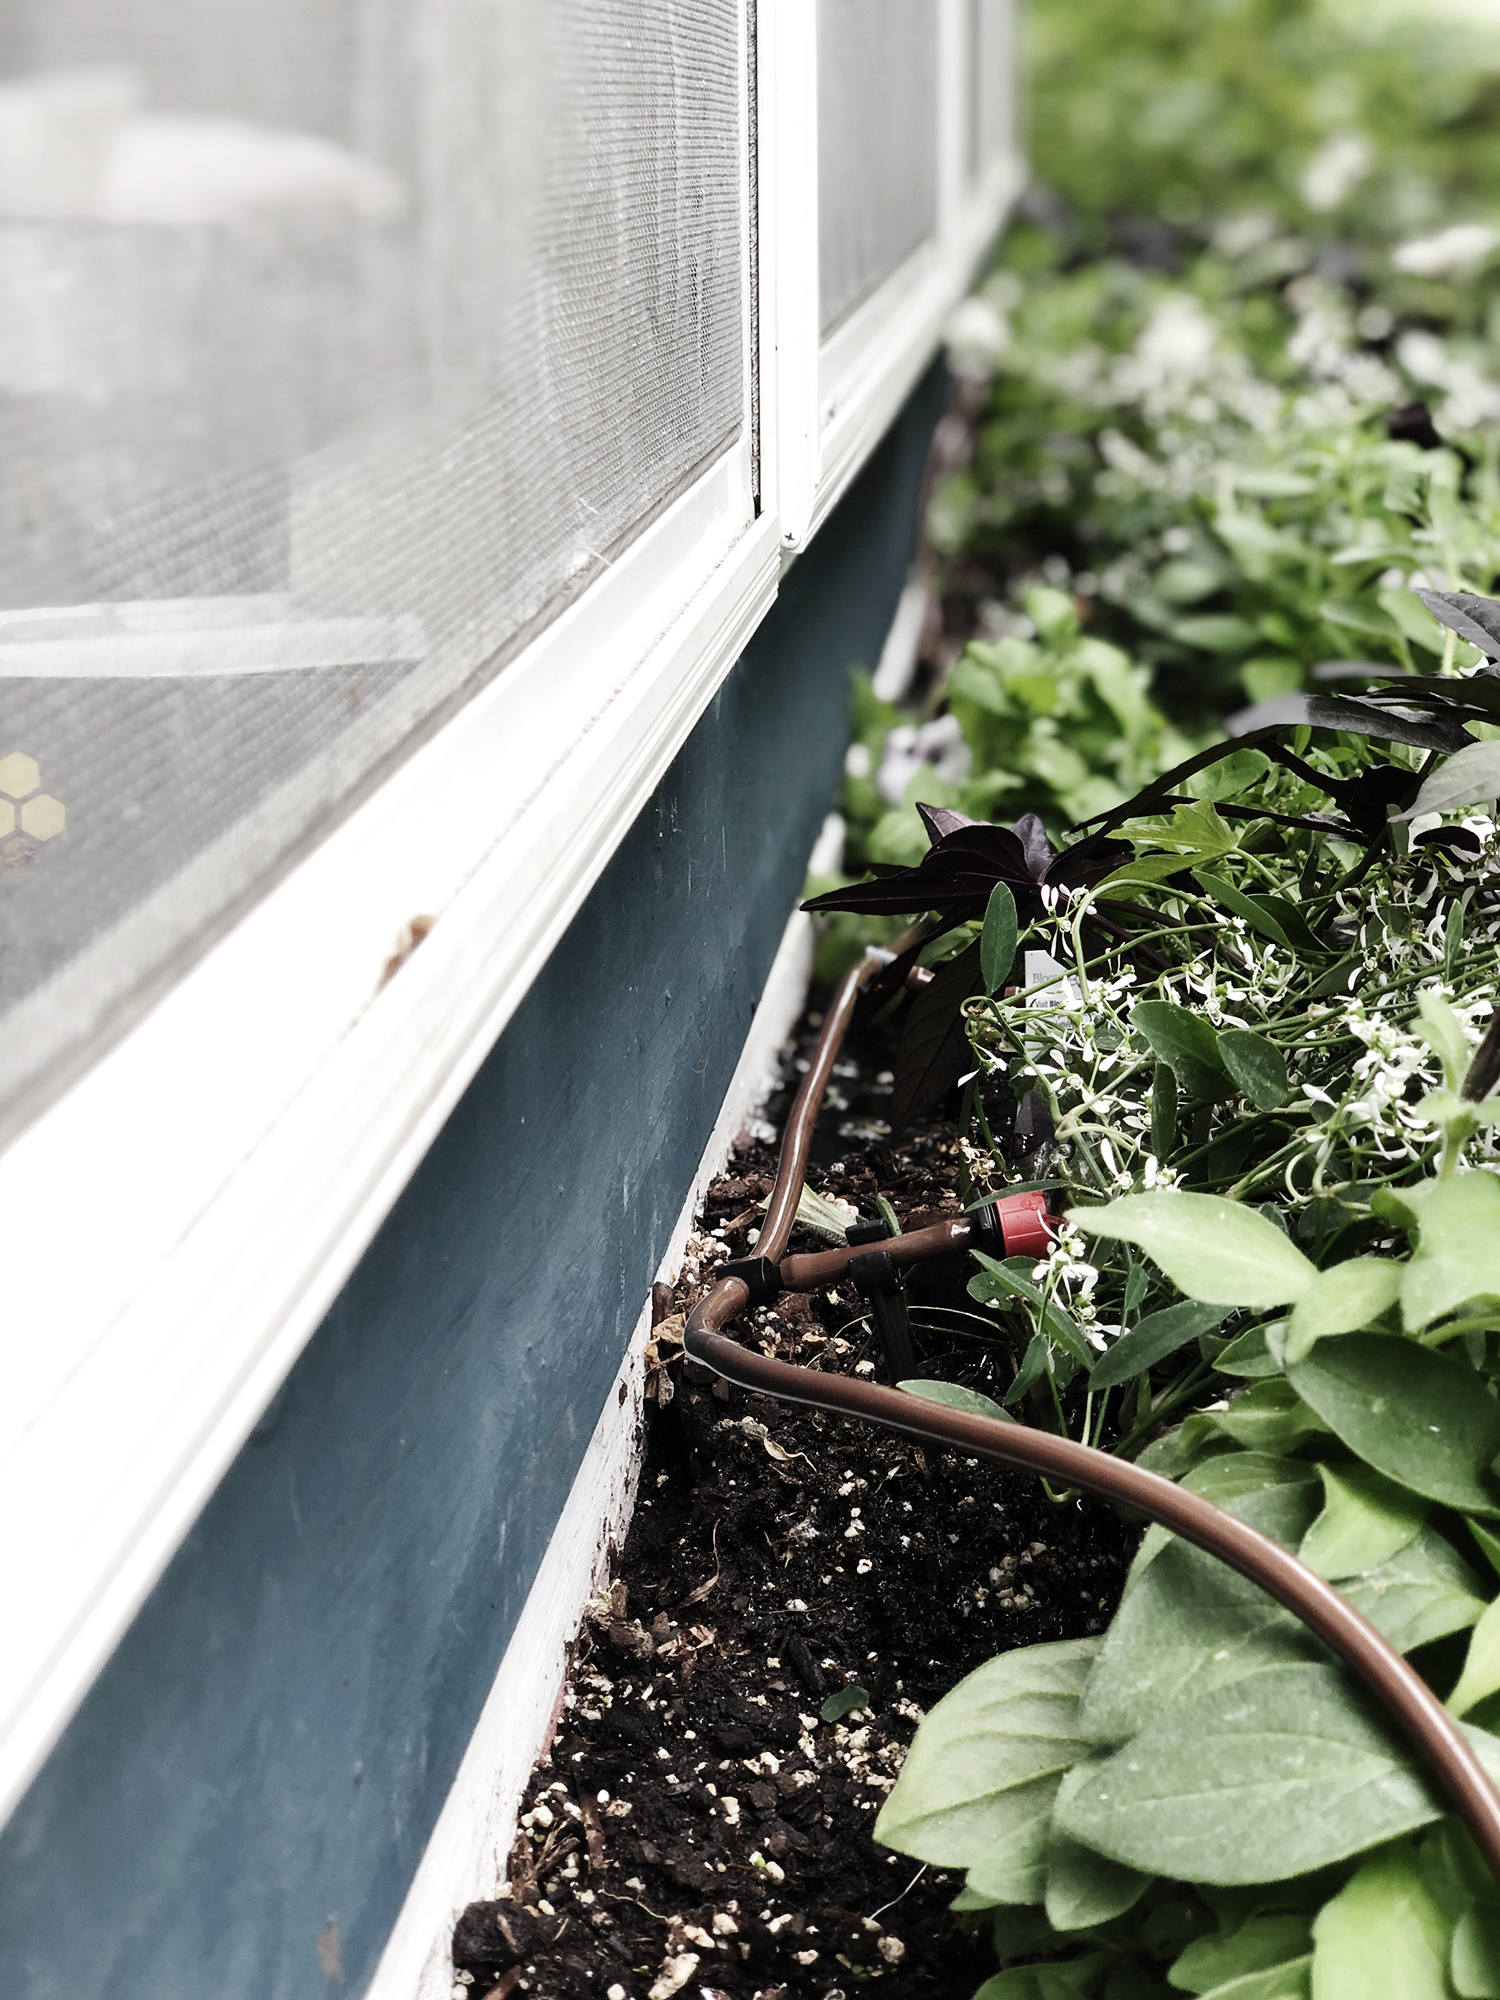 No Touch Smart Watering System for your window boxes, planters and lawn | Deuce Cities Henhouse